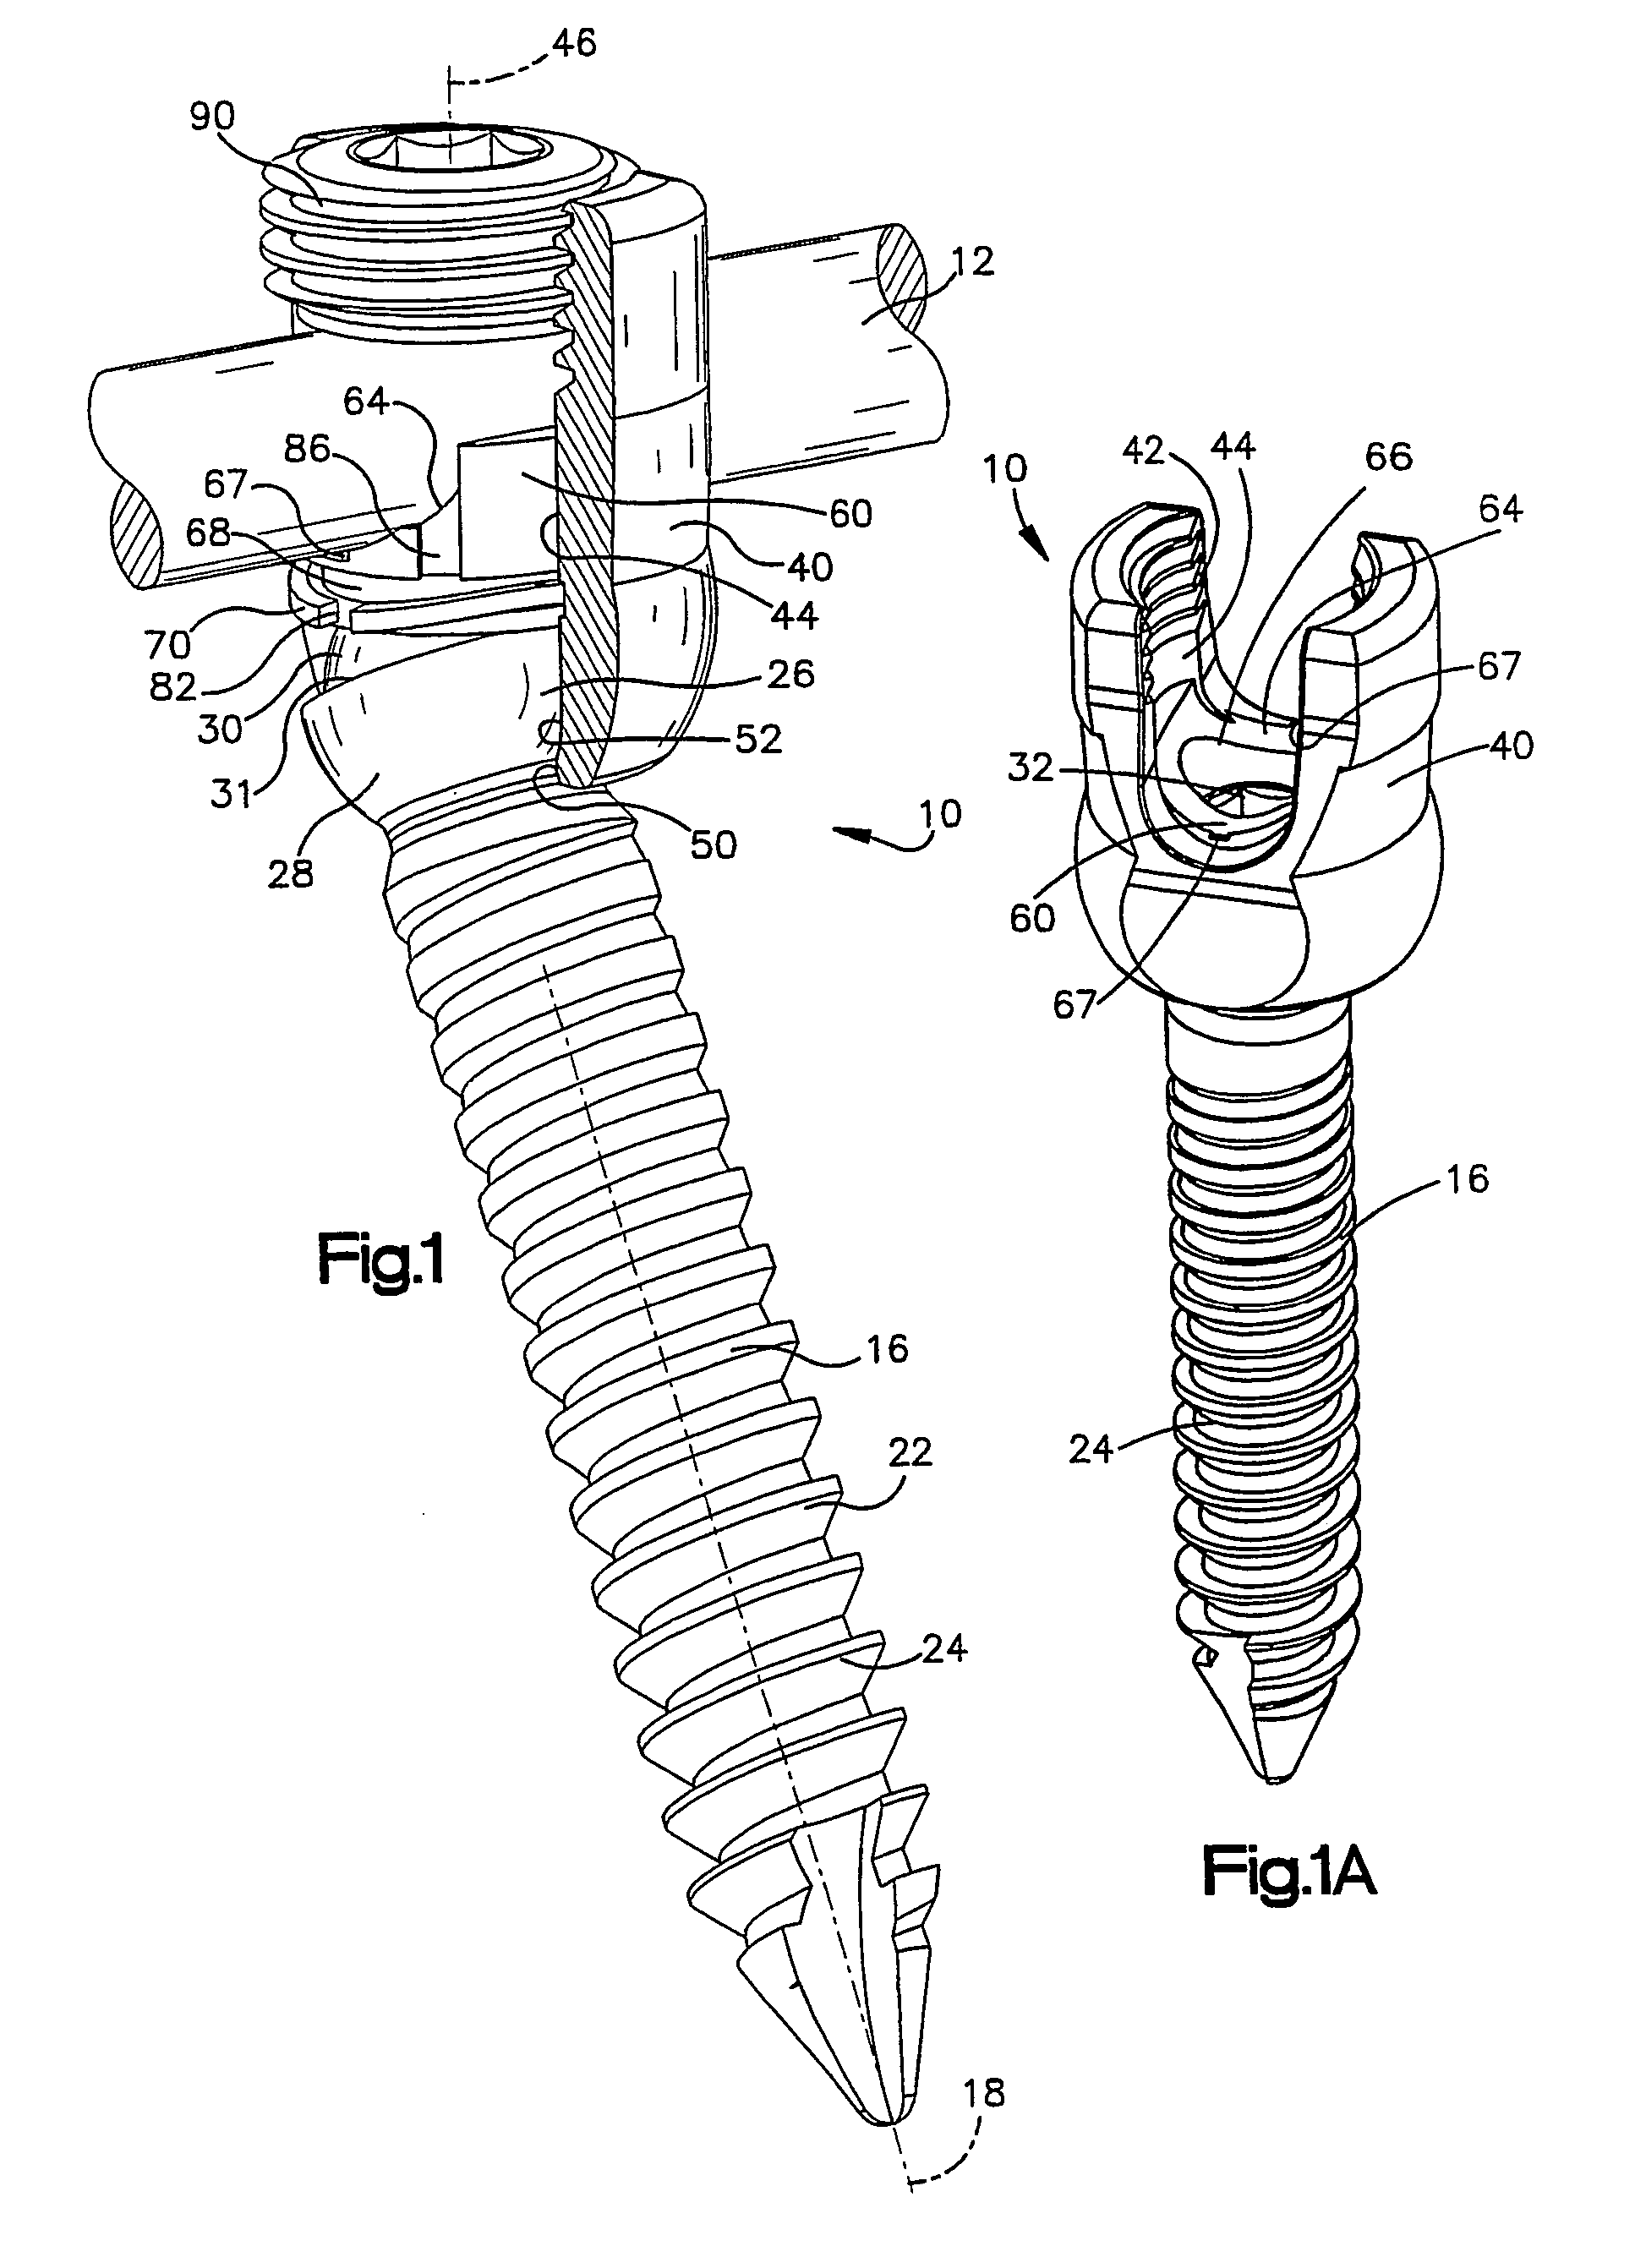 Apparatus for connecting a longitudinal member to a bone portion